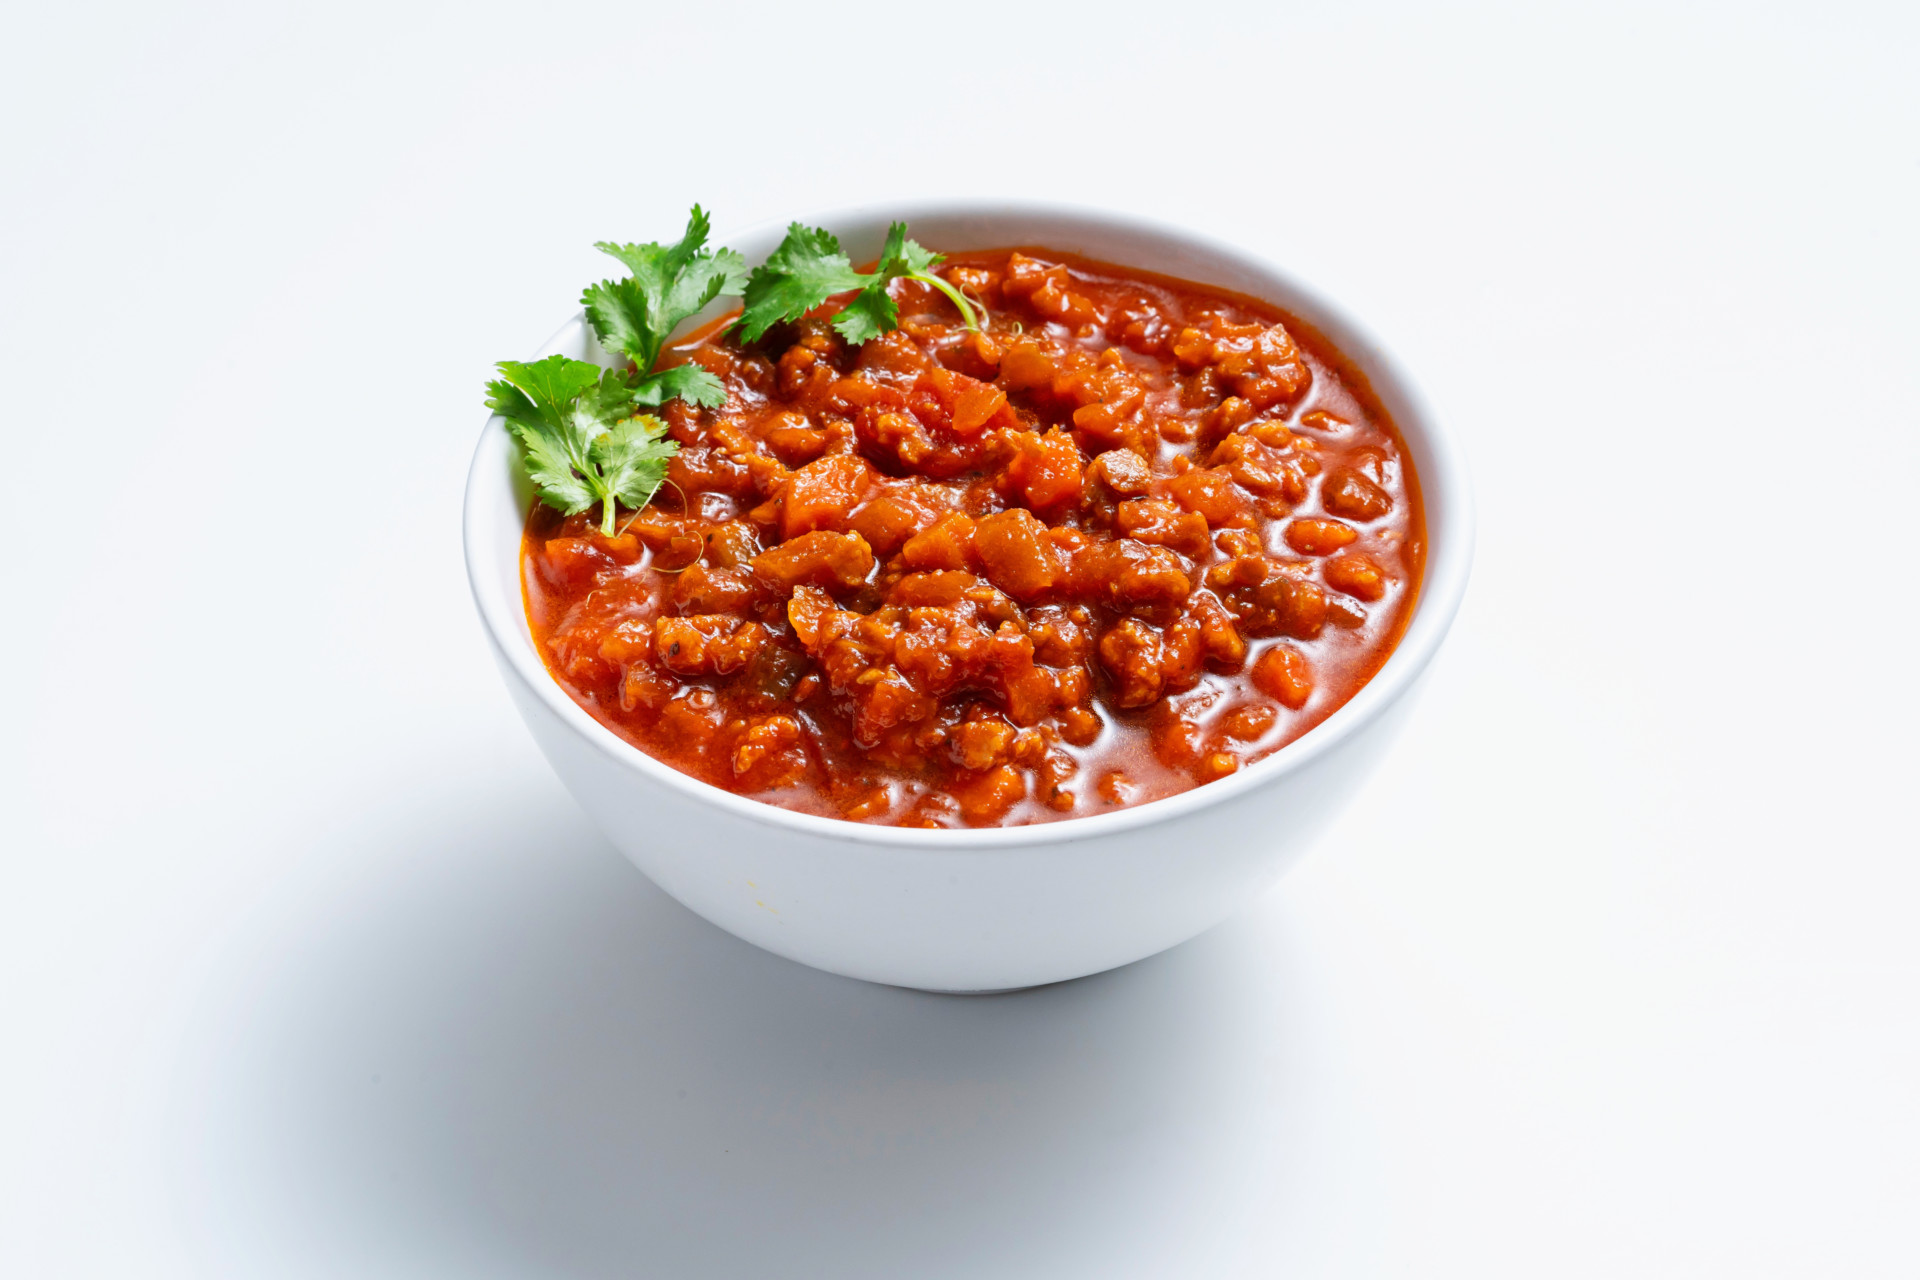 Vegan Bolognese in a bowl with cilantro garnish